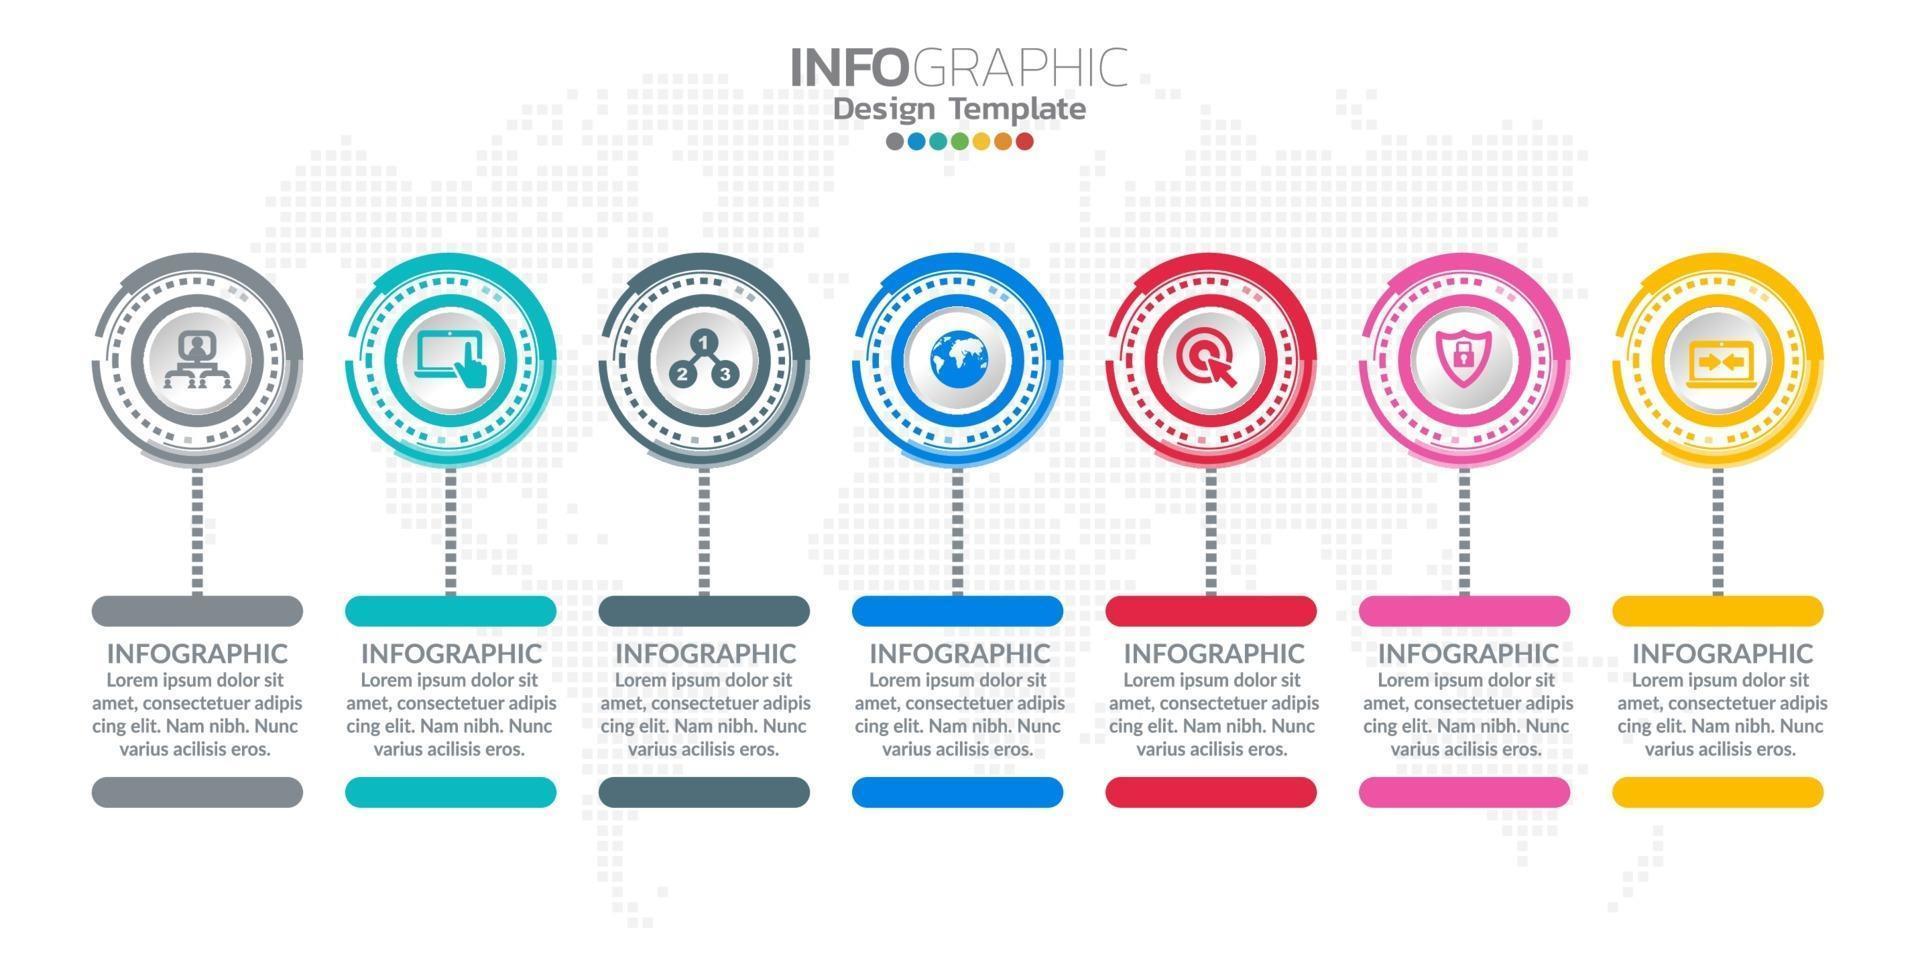 Infographics timeline design template with icons and text label. vector